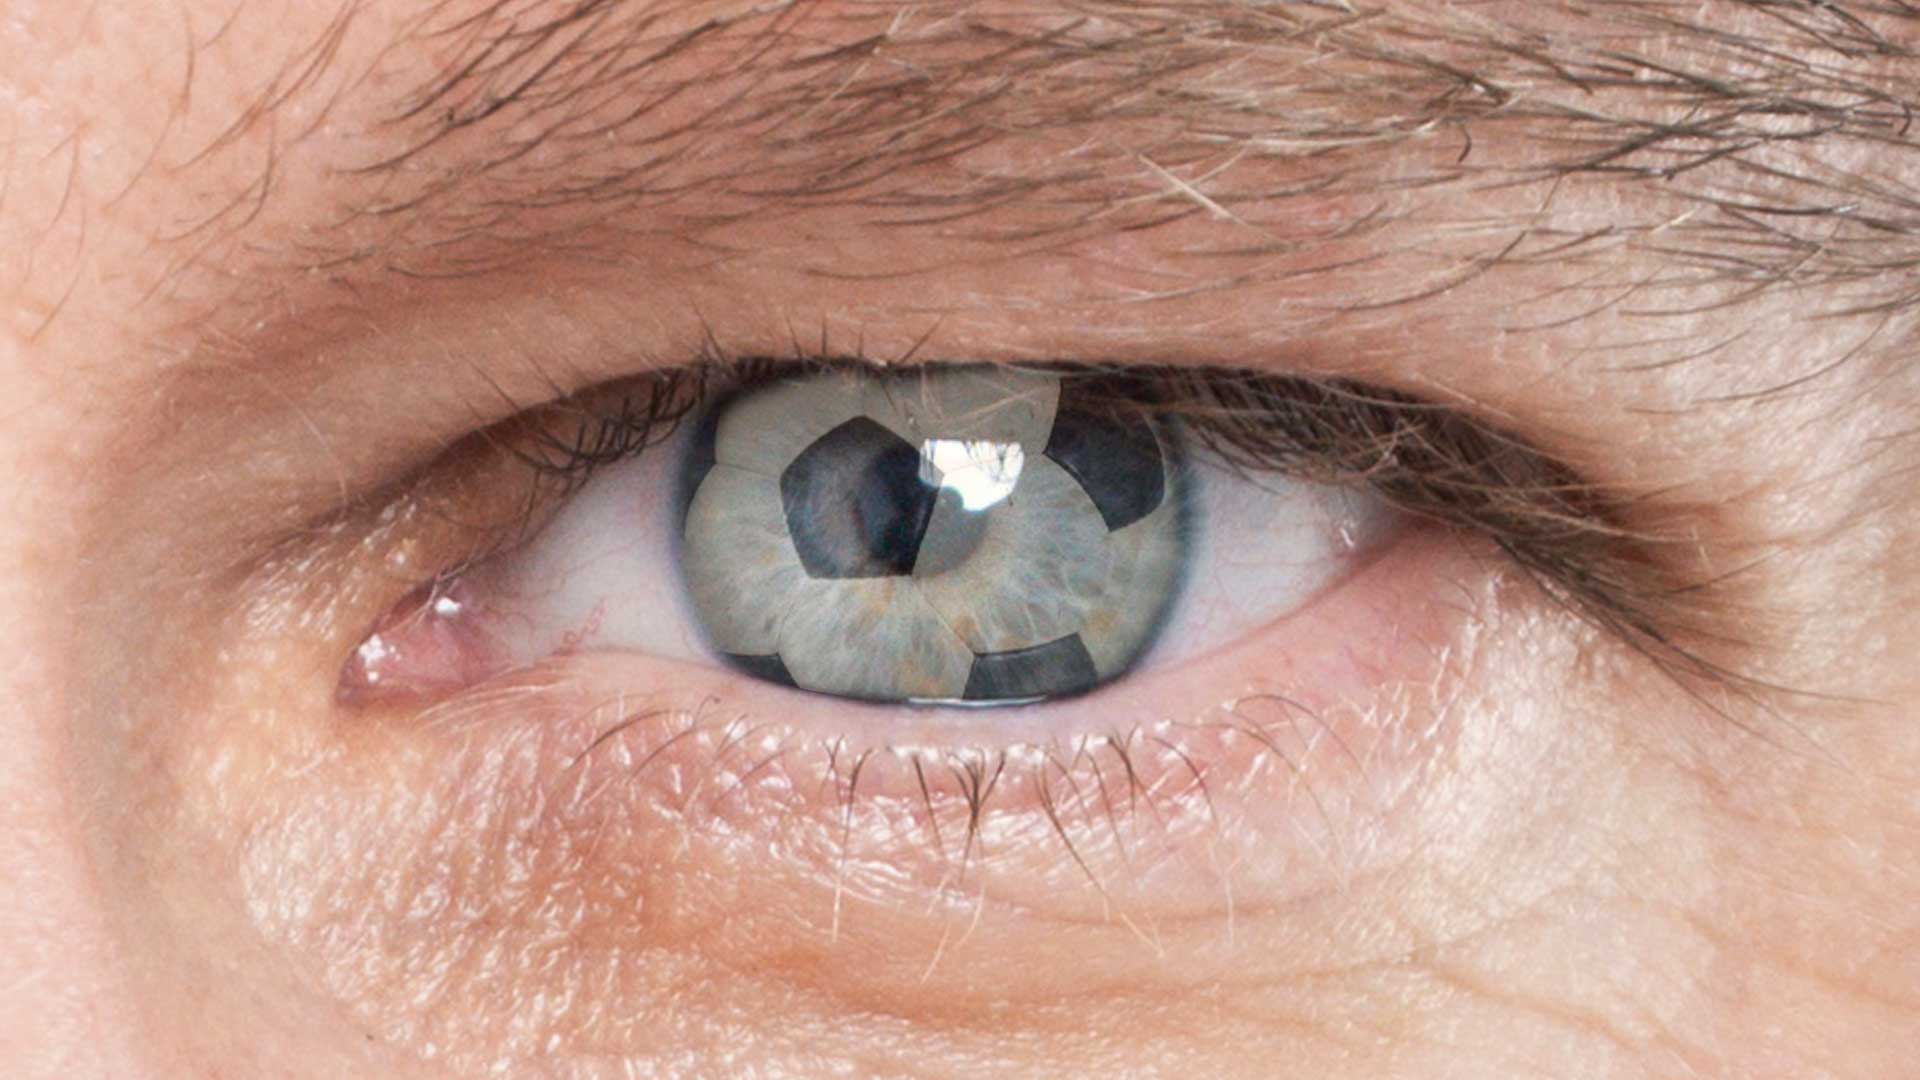 A person with a reflection of a football in their eye